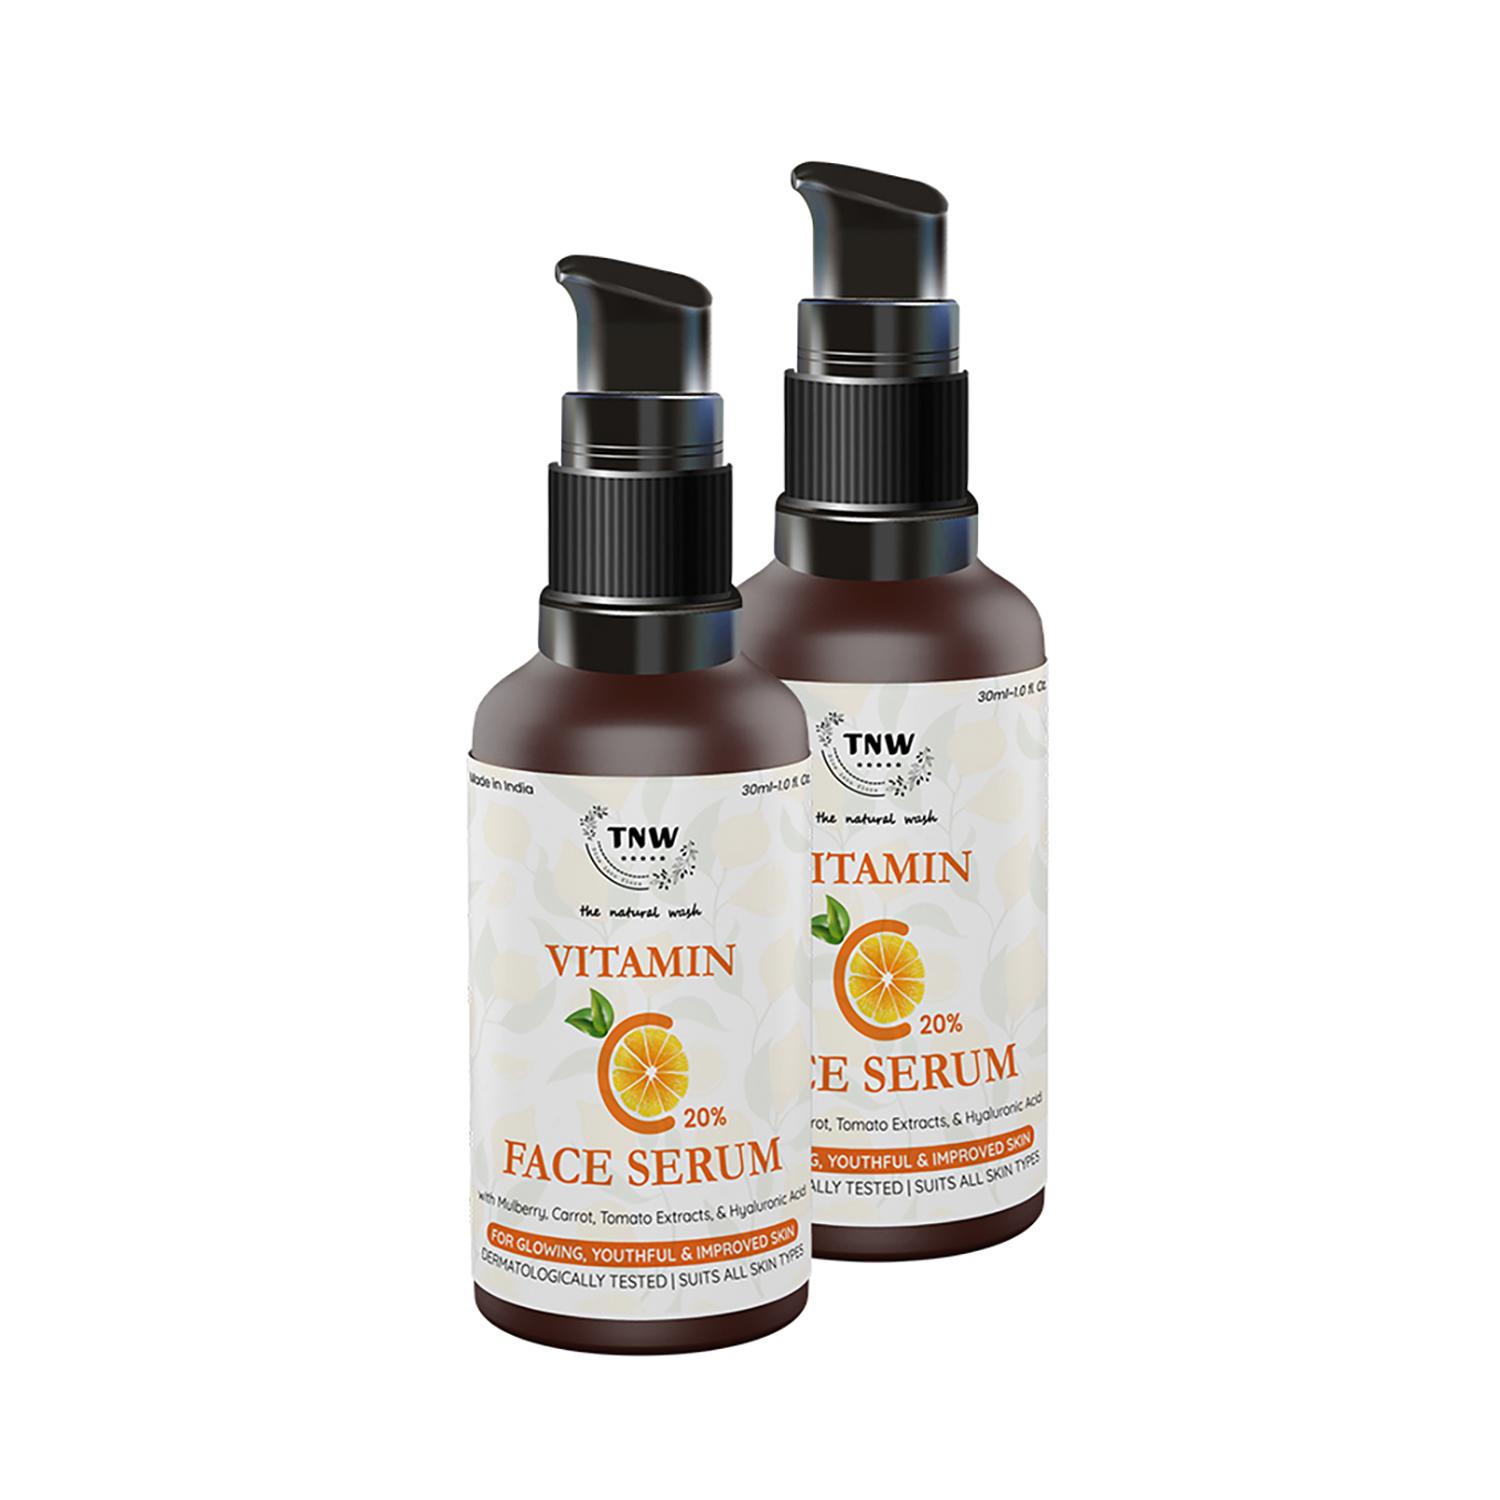 TNW The Natural Wash | TNW - The Natural Wash Vitamin C Face Serum Pack of 2 Combo